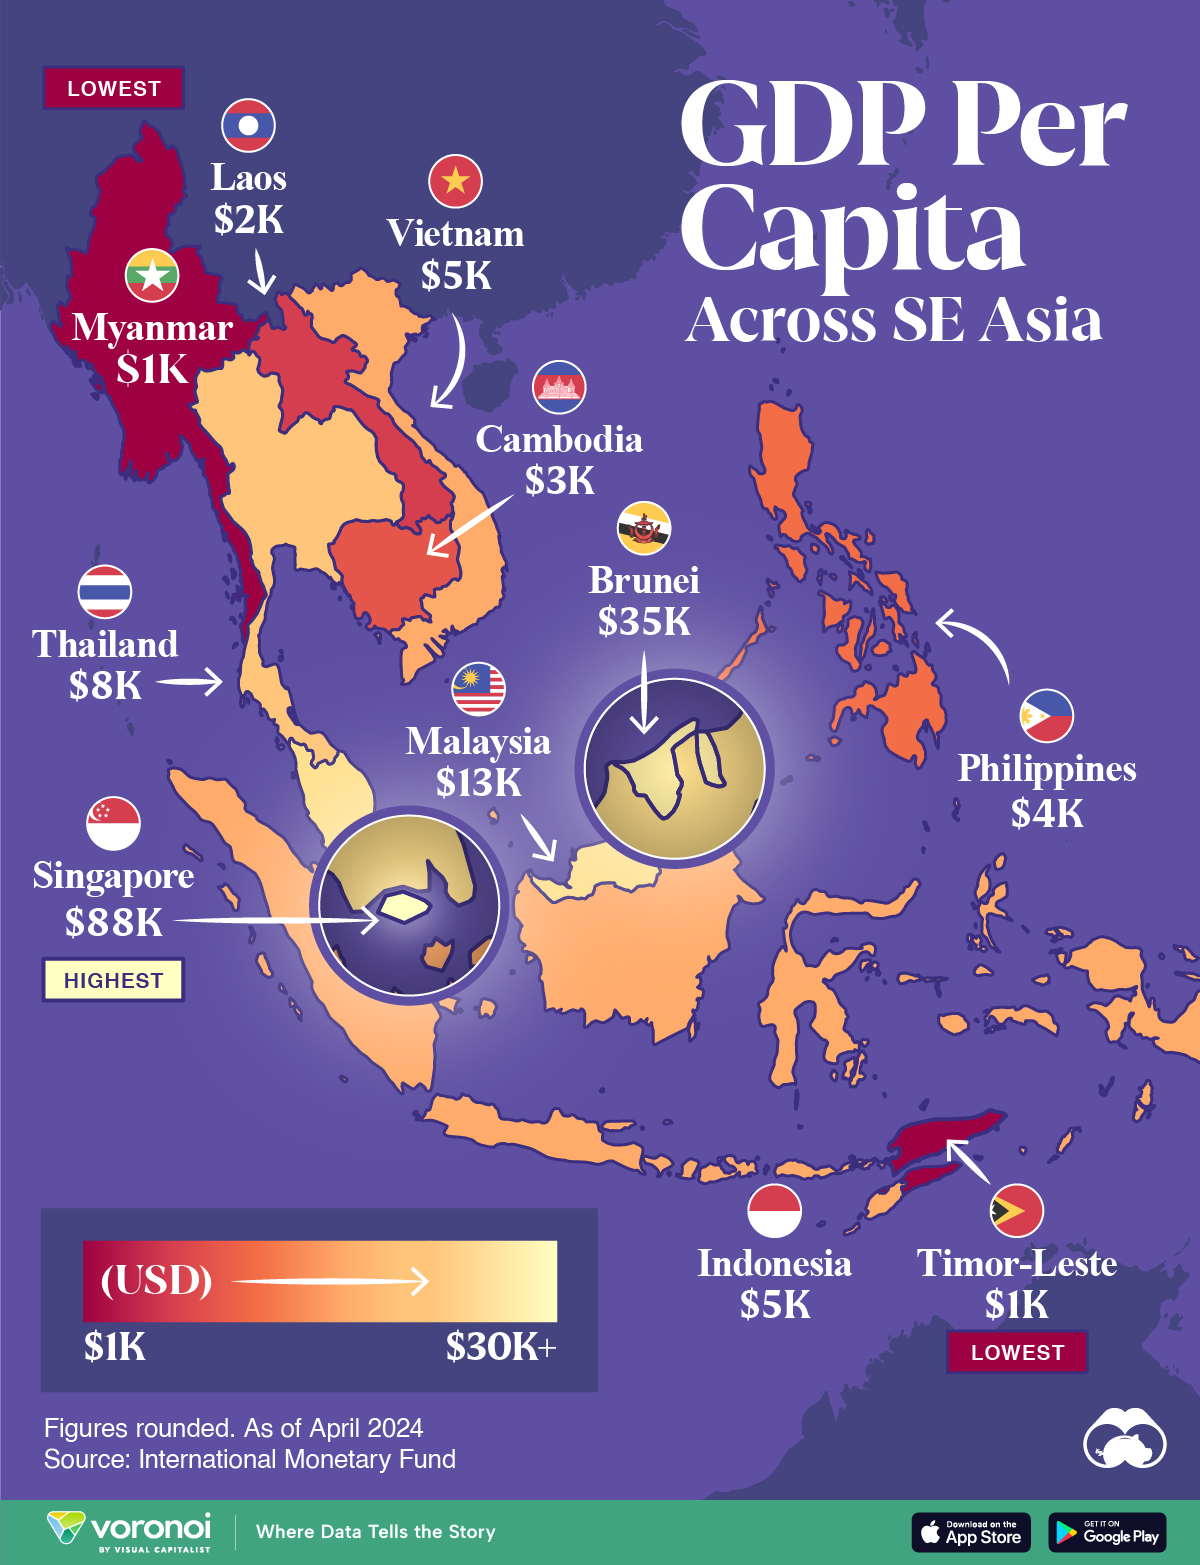 A map of GDP per capita levels for 11 Southeast Asian countries.